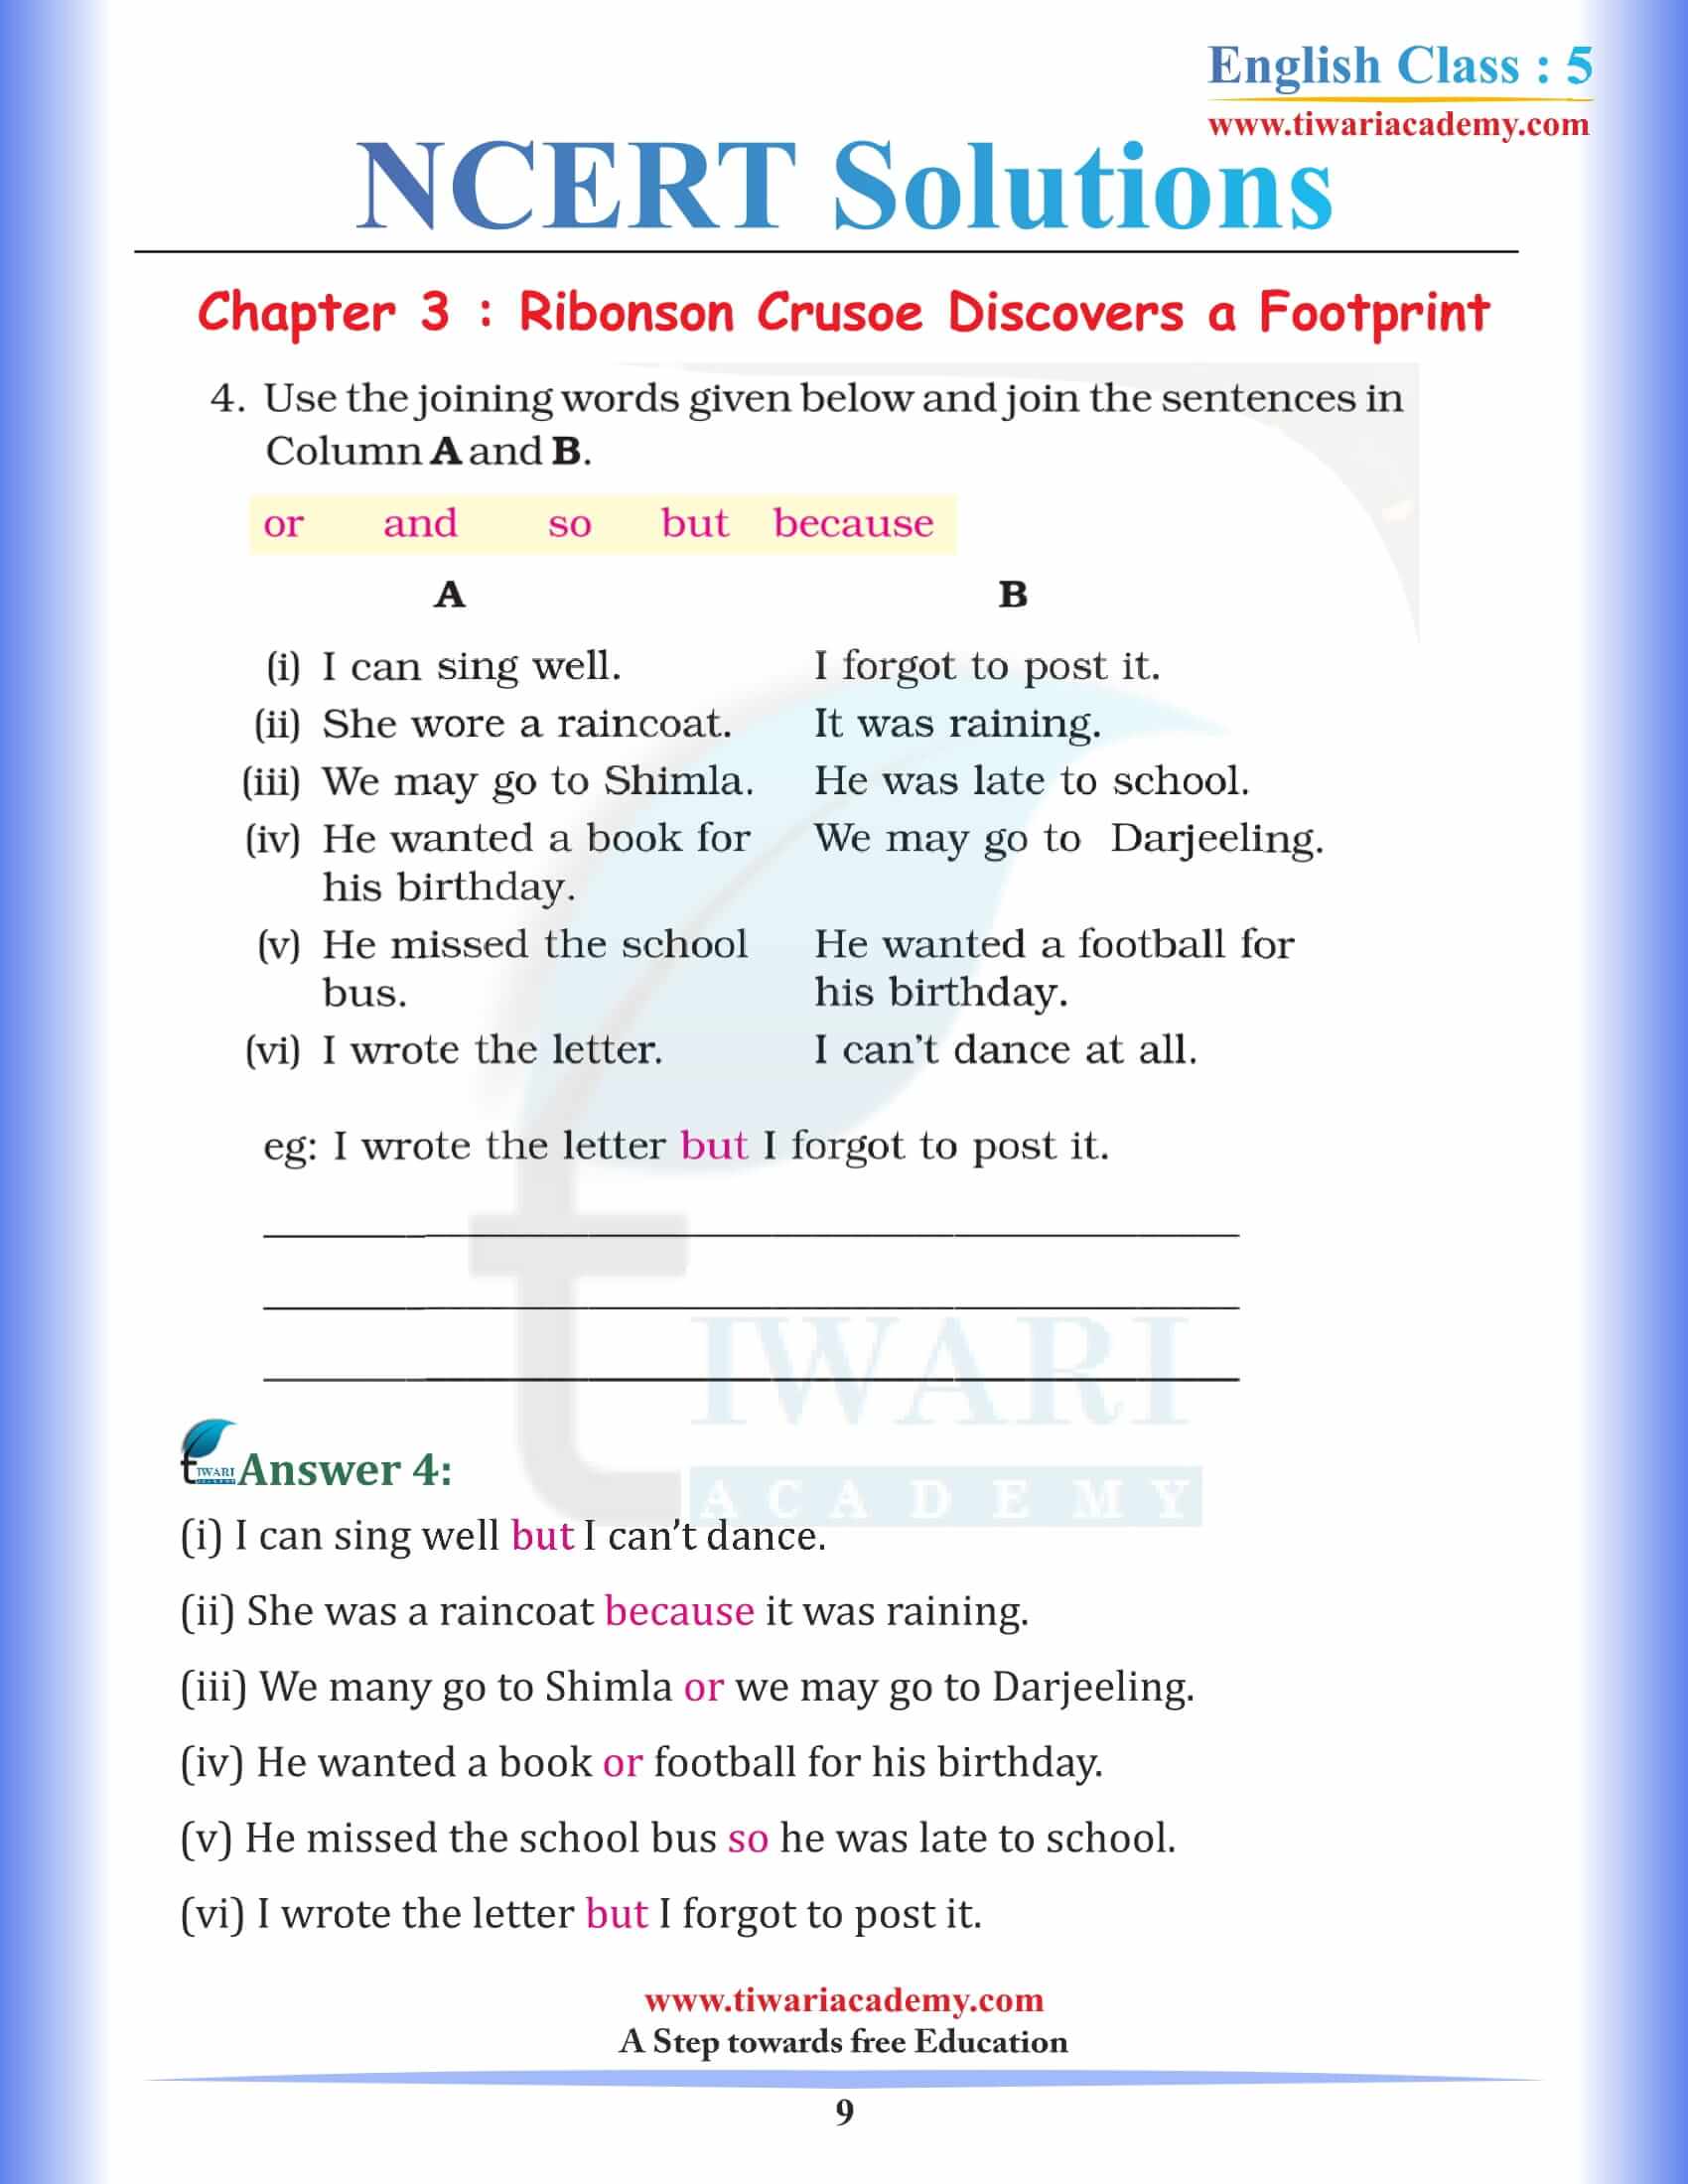 NCERT Solutions for Class 5 English Chapter 3 Robinson Crusoe Discovers a footprint free sols